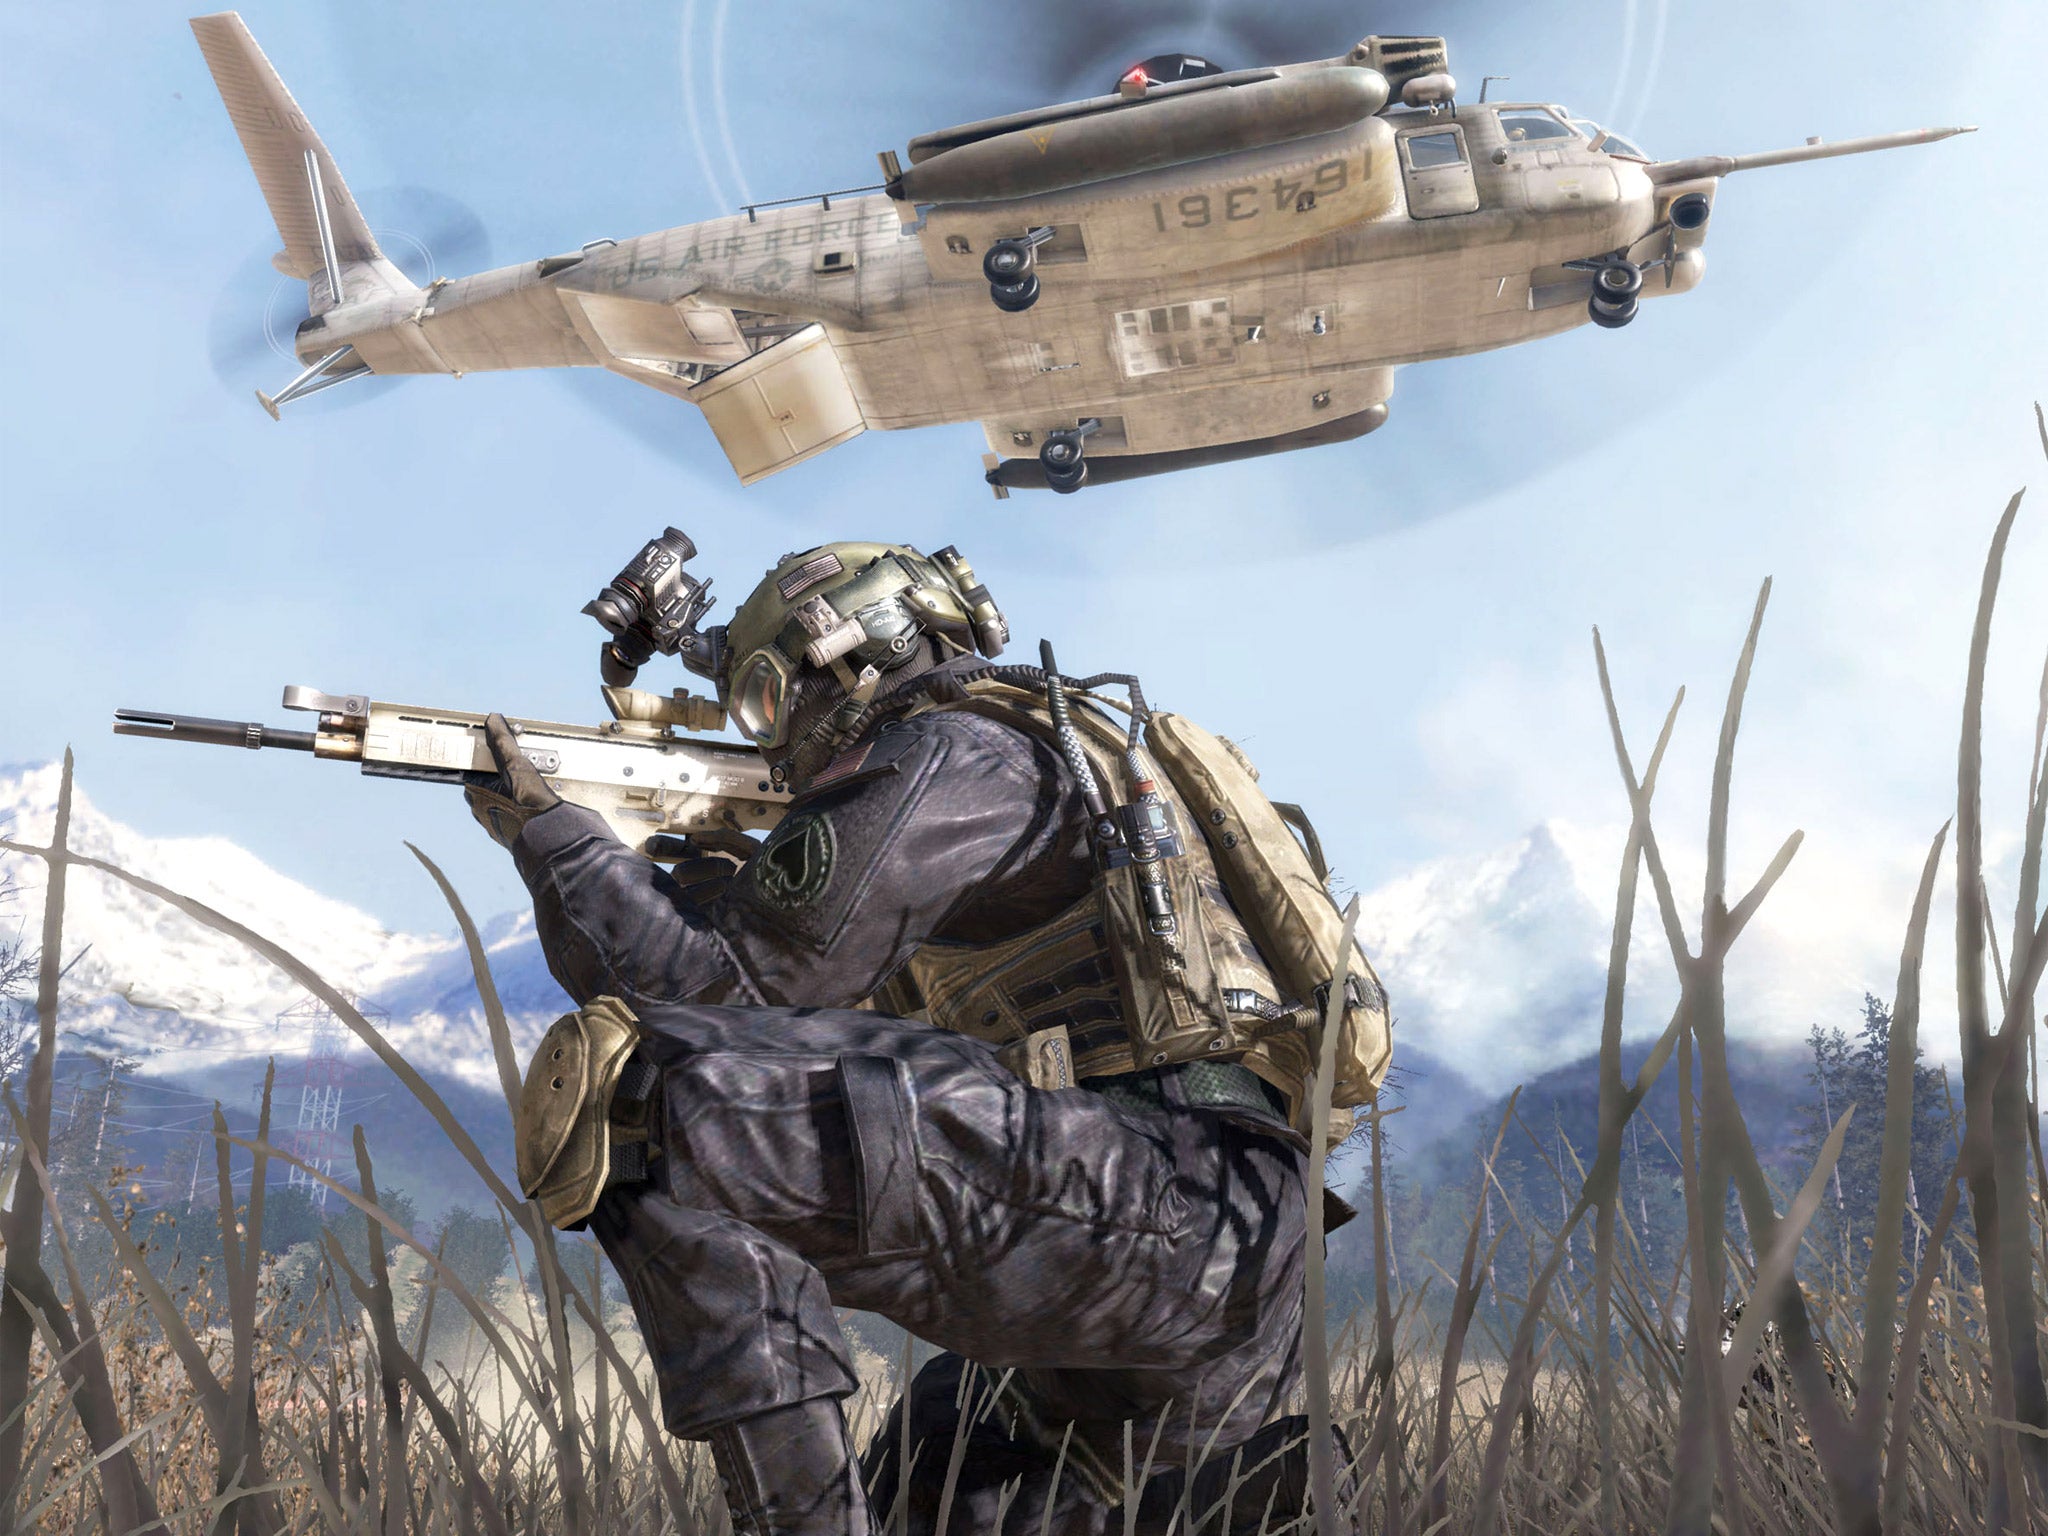 Games like ‘Call of Duty’ have previously been accused of making people more violent